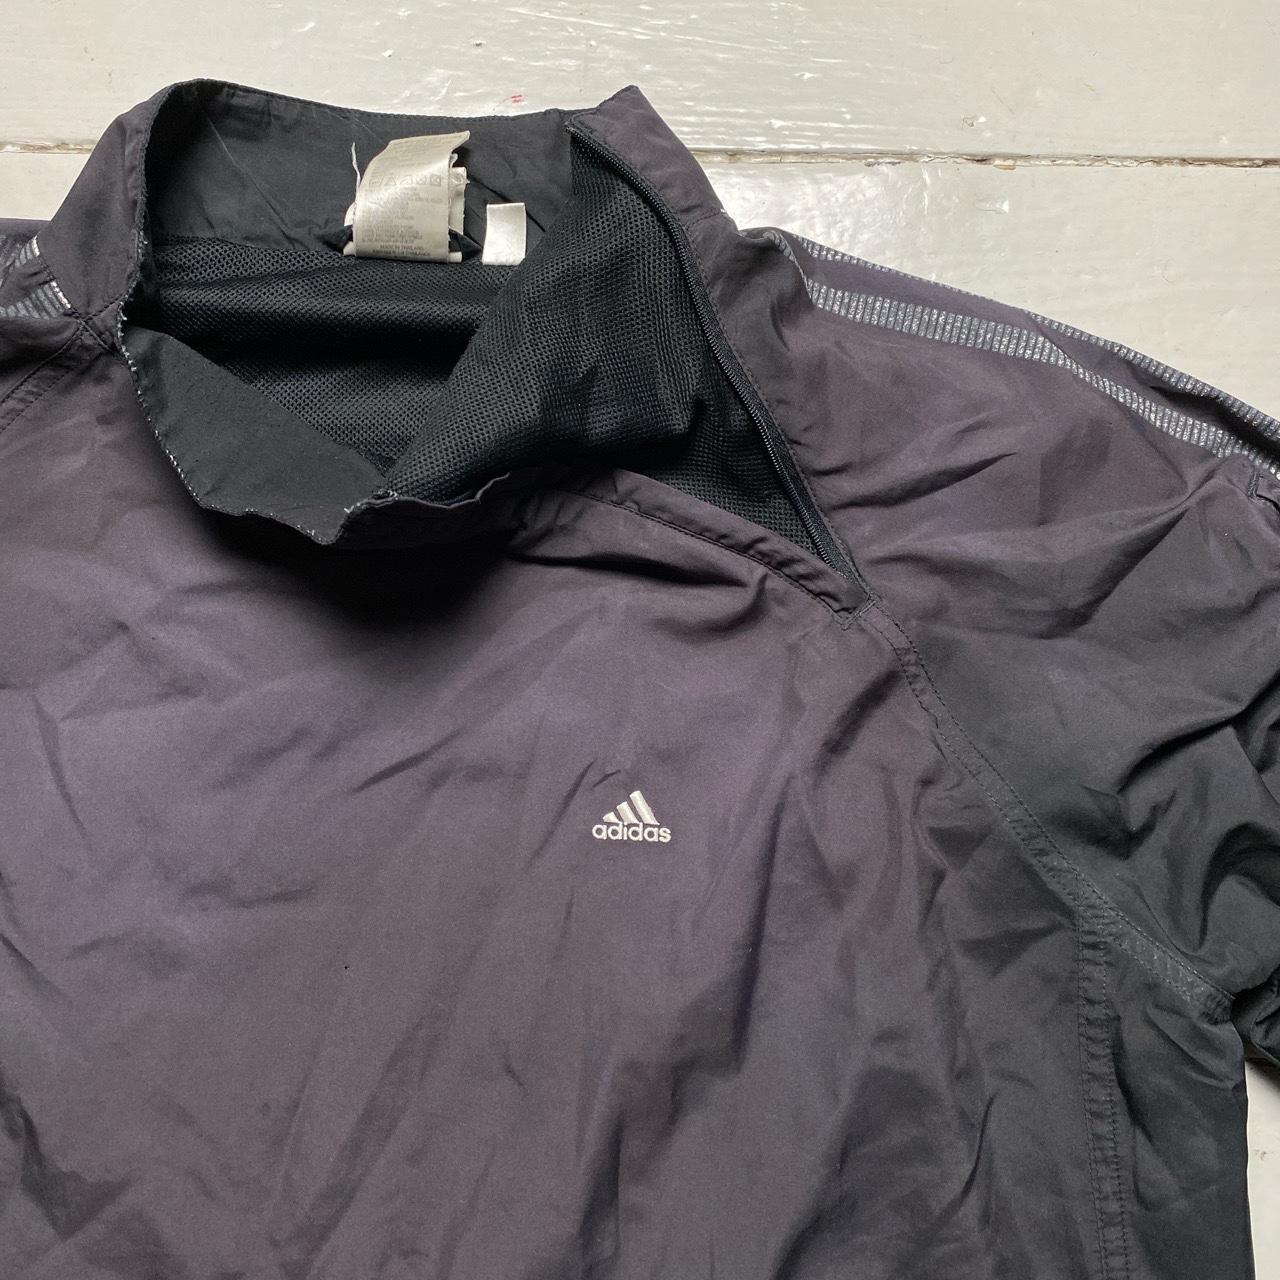 Adidas Vintage Baggy Shell Track Jacket Black and White